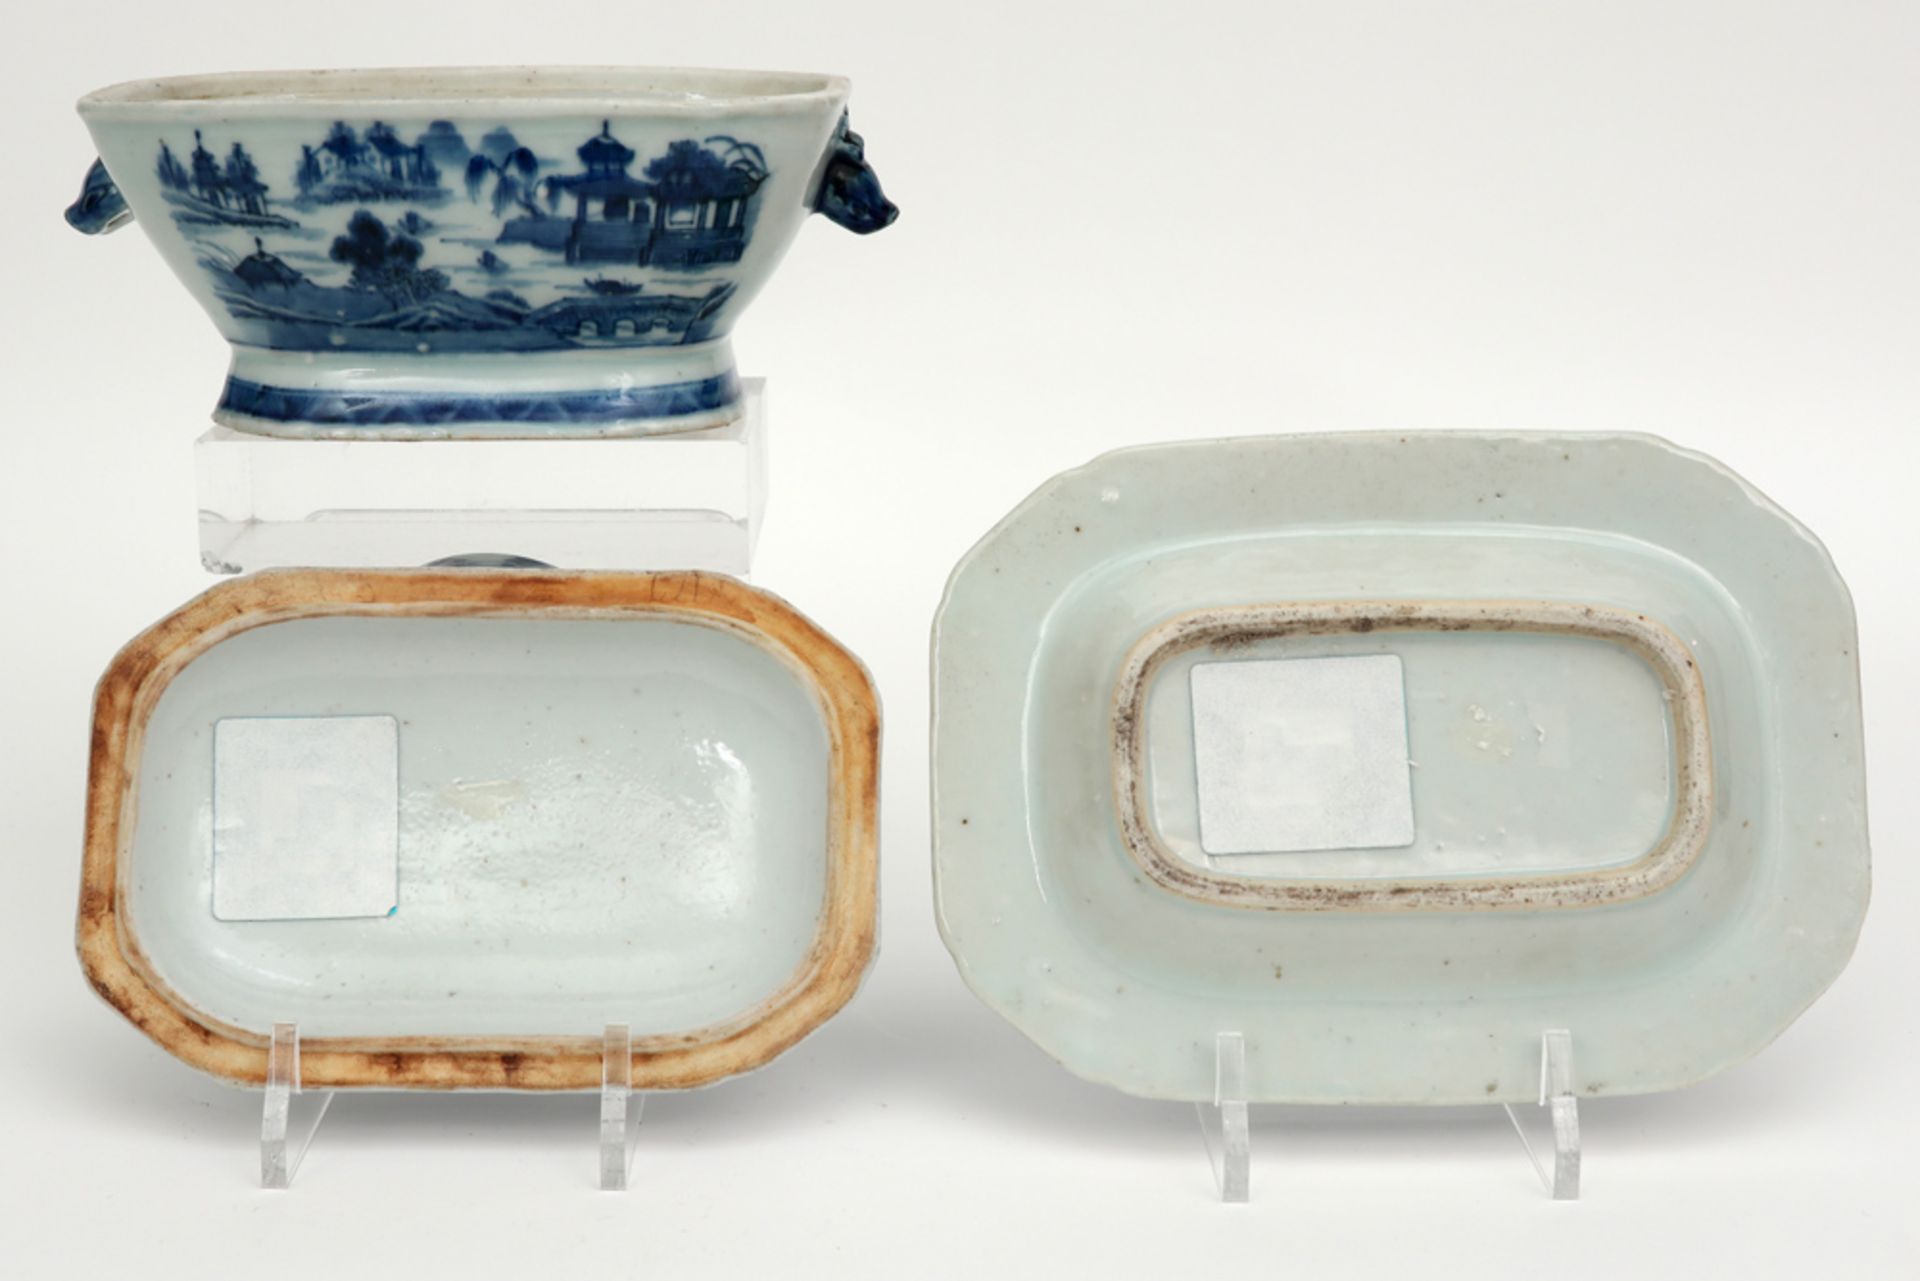 small 18th Cent. Chinese tureen with its lid and dish in porcelain with a blue-white landscape decor - Image 3 of 4